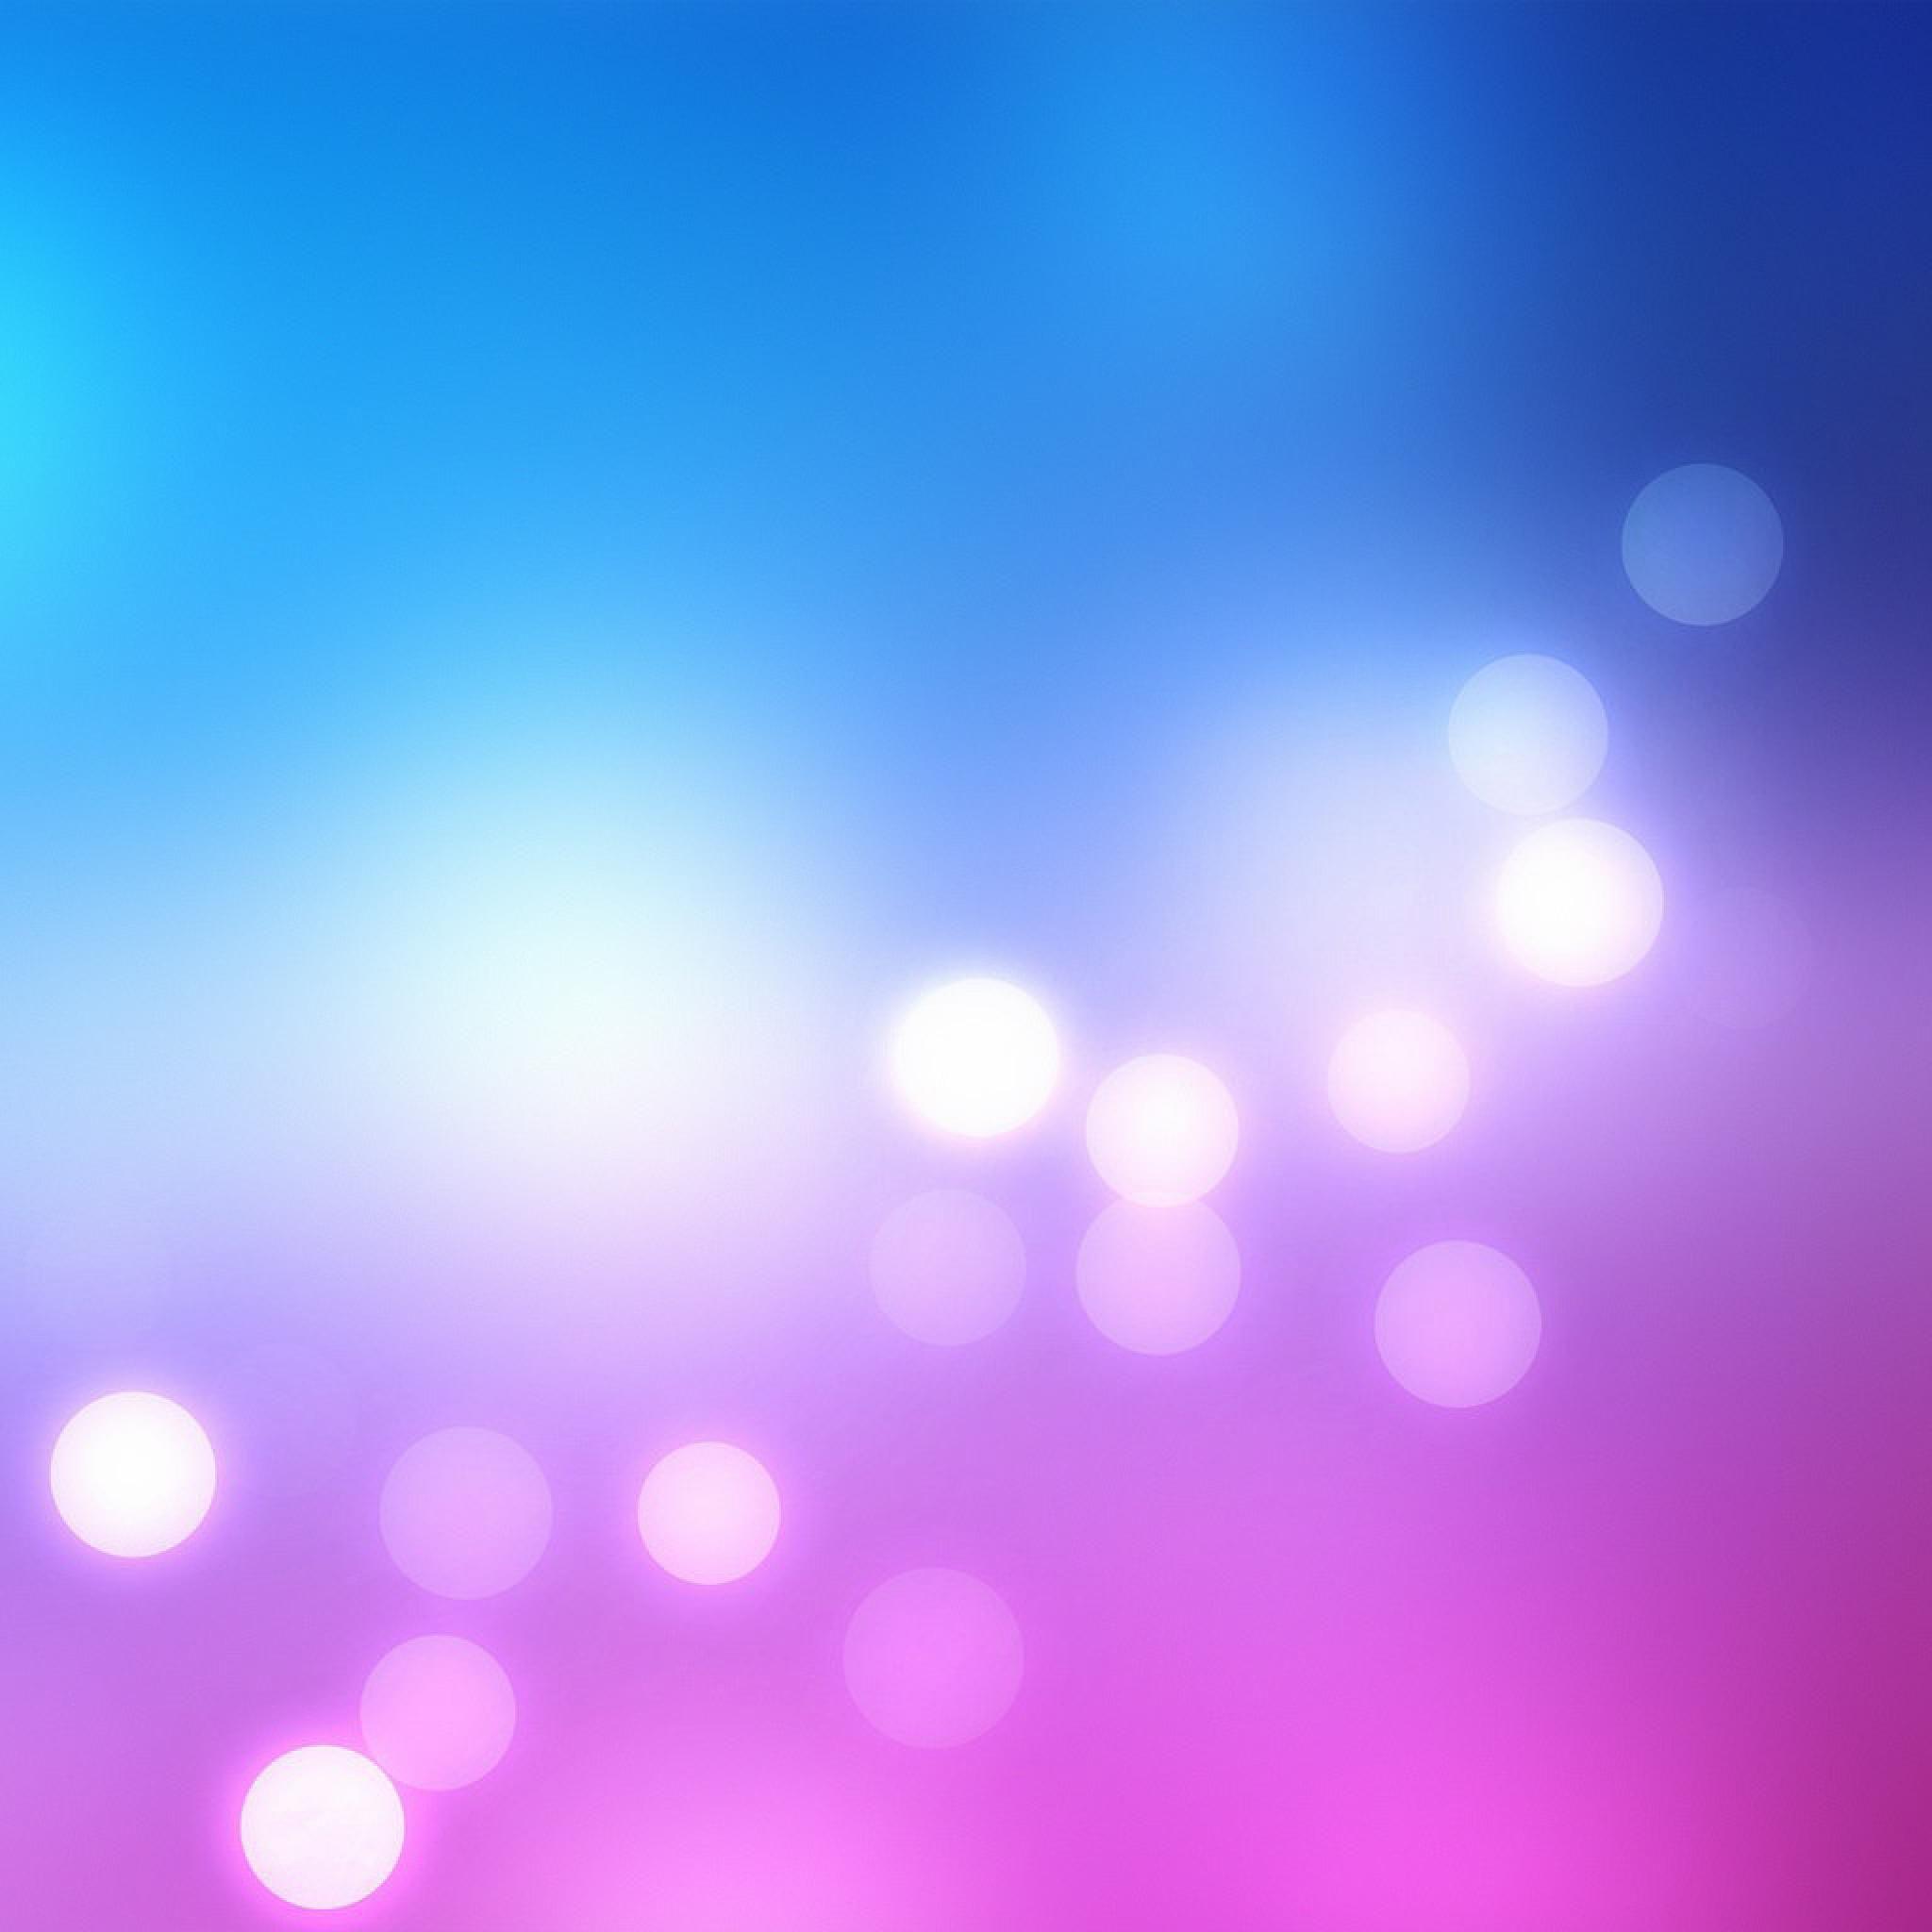 The best blurry wallpaper for iPad Air